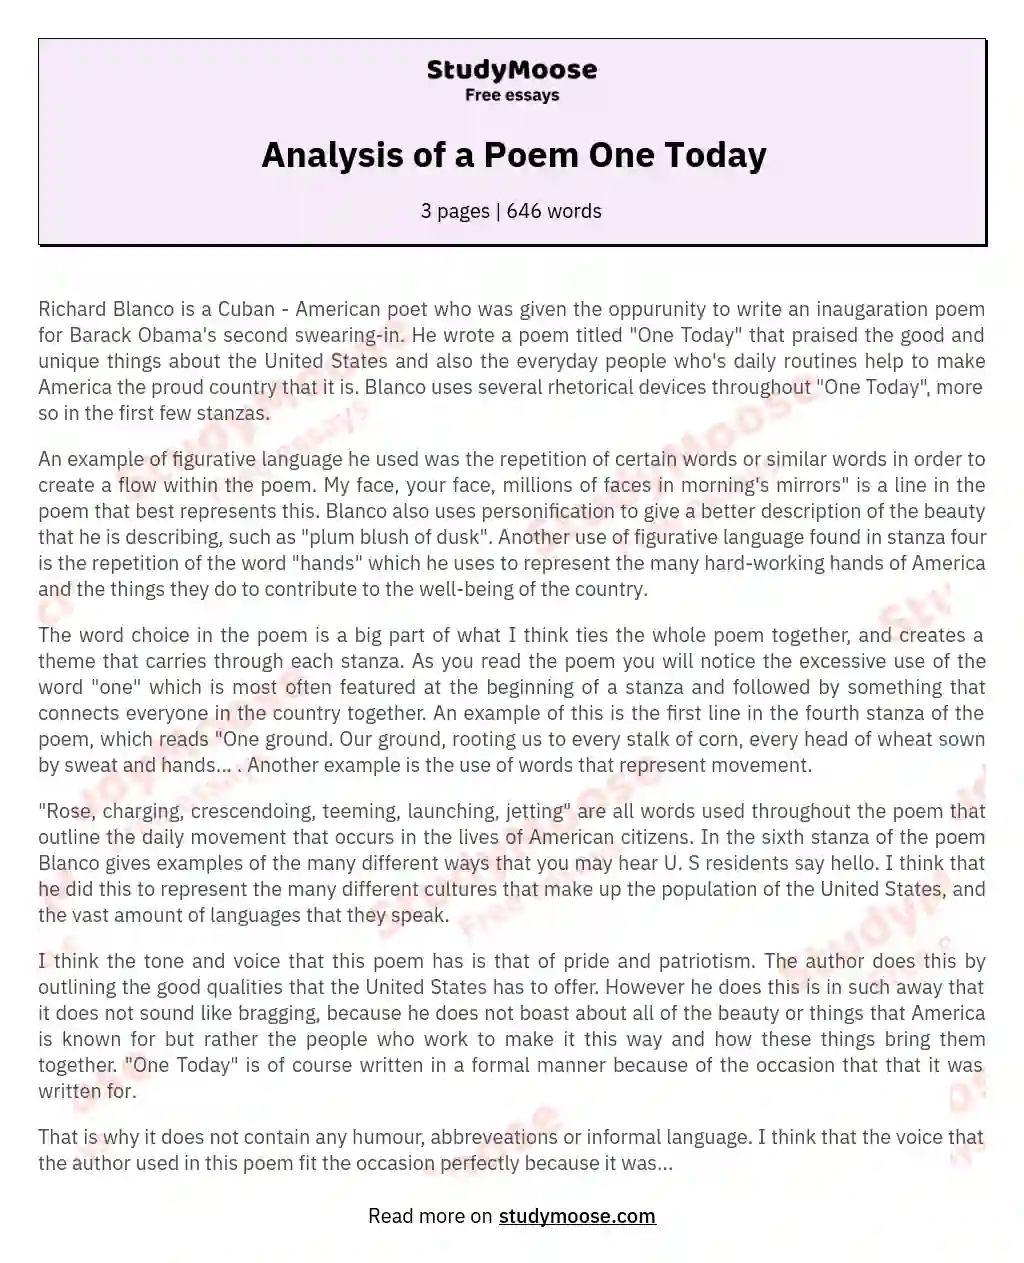 Analysis of a Poem One Today essay